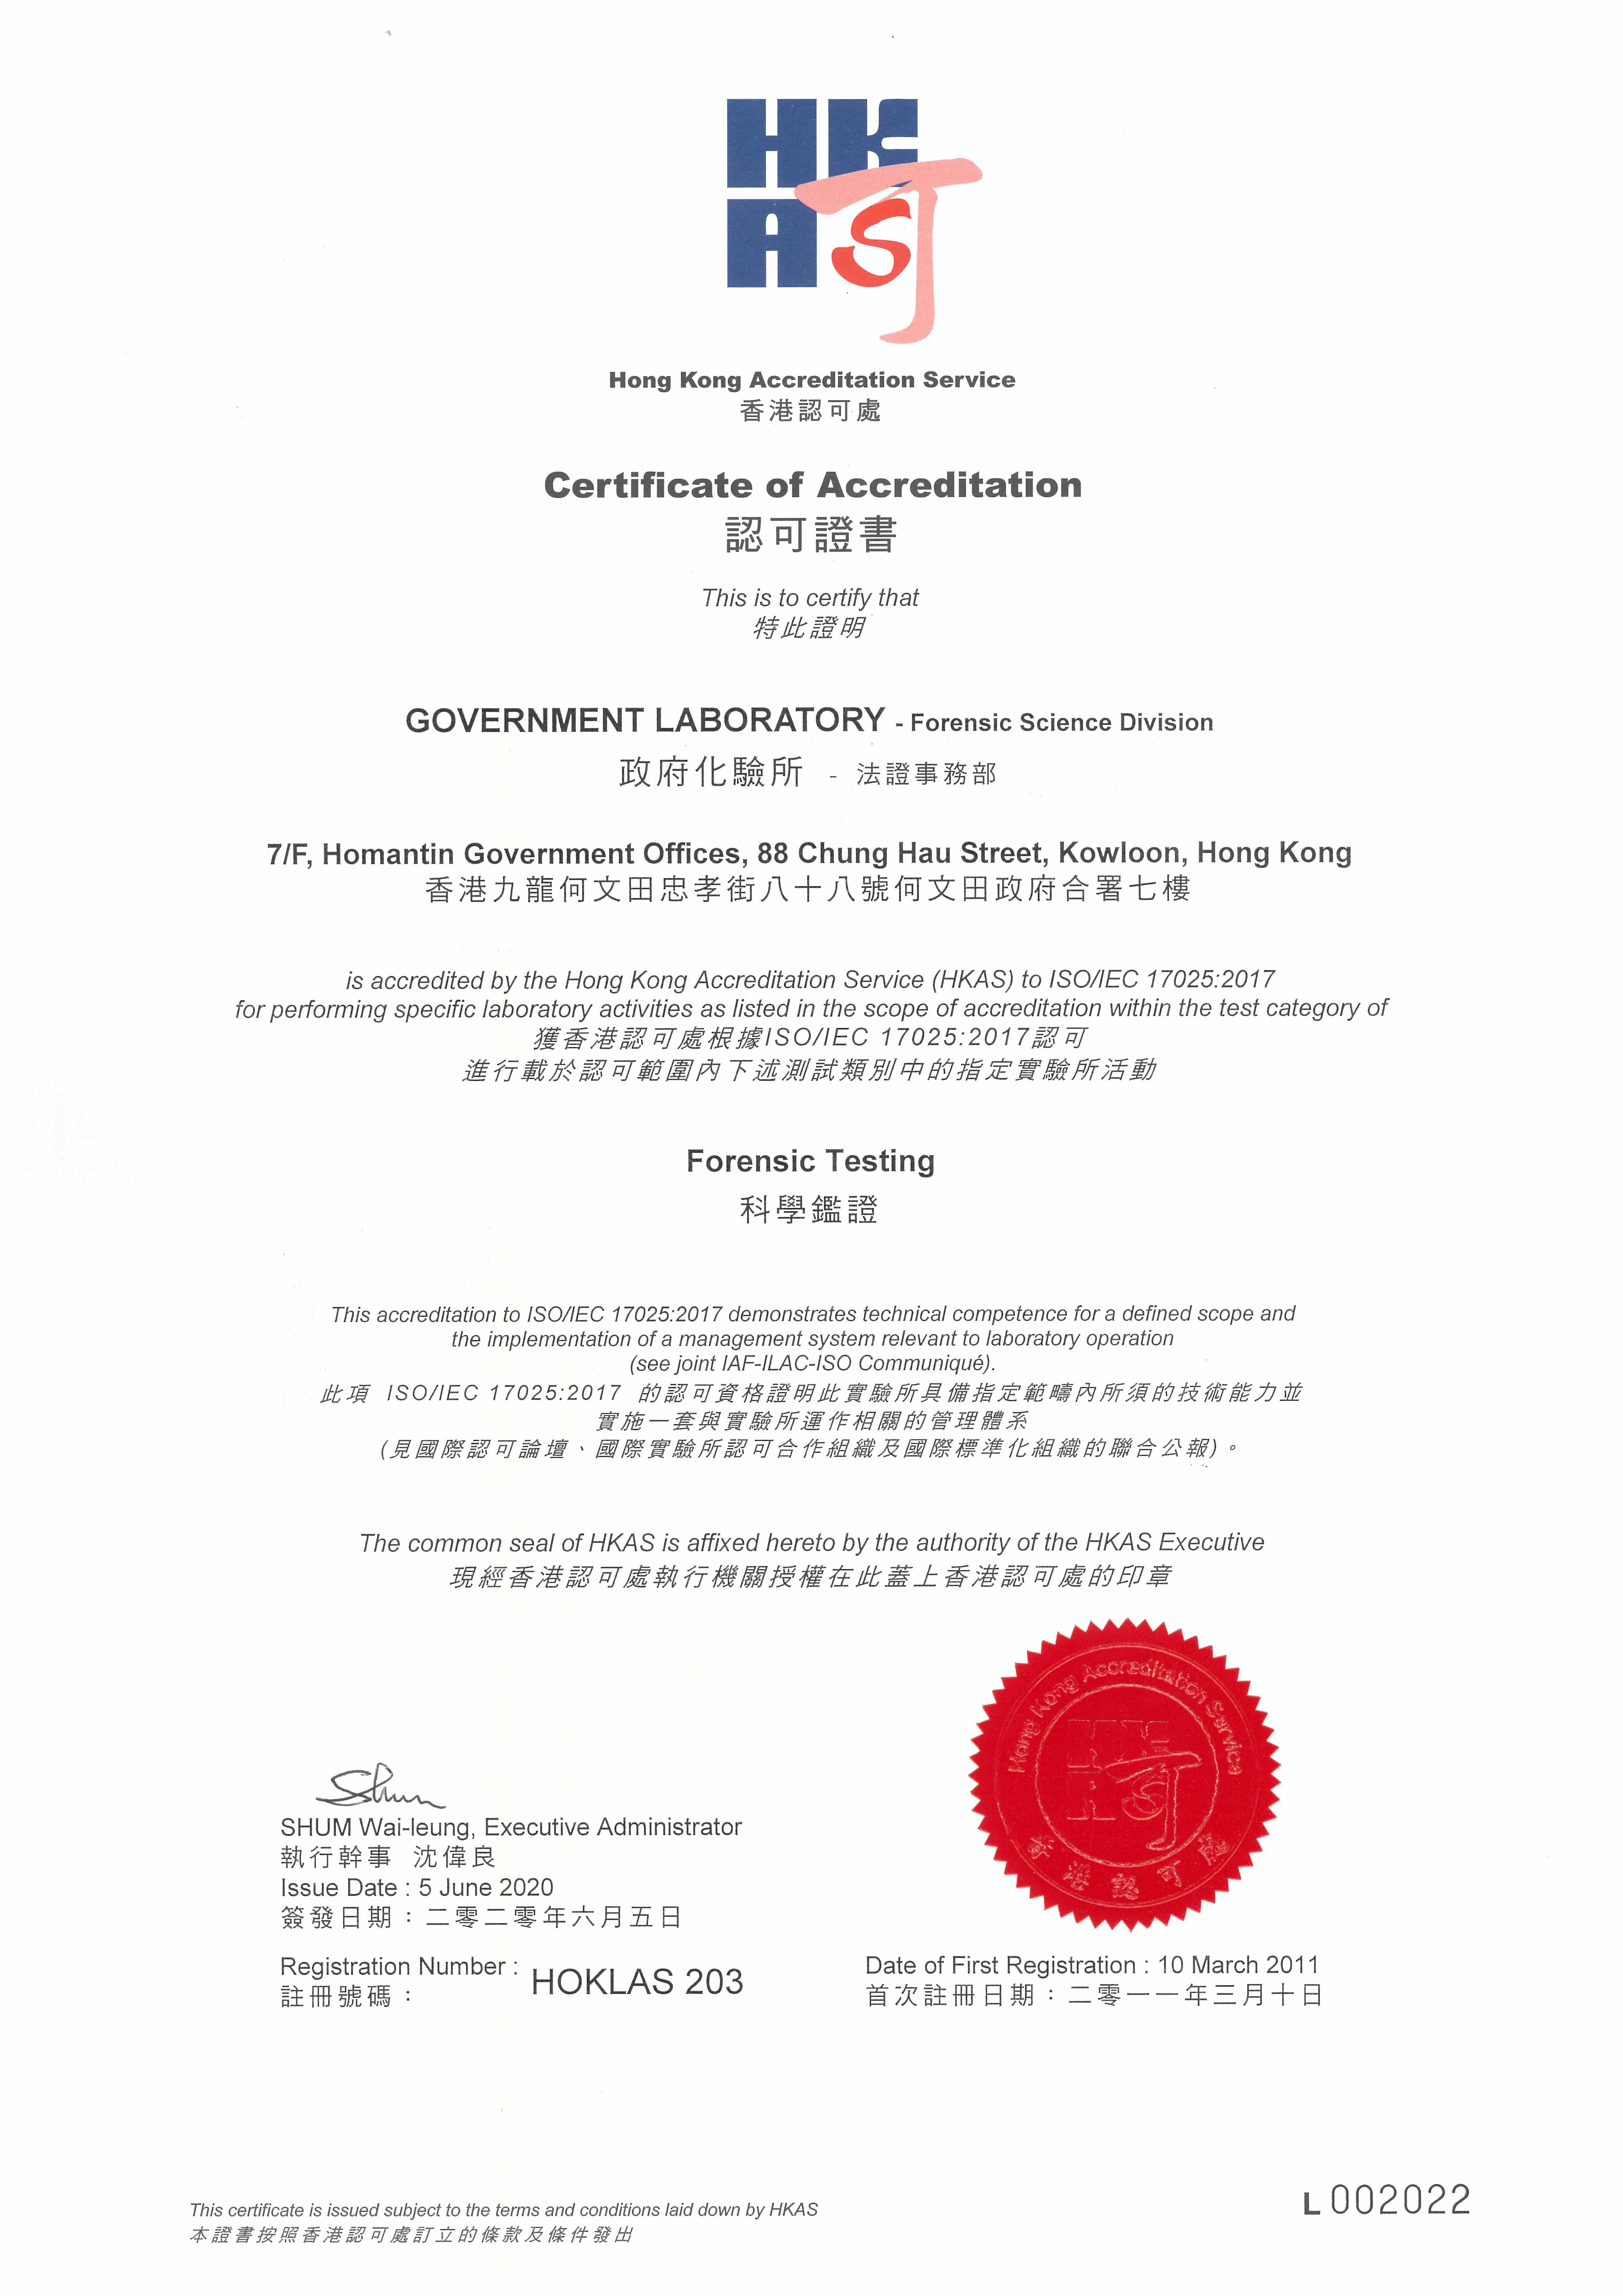 Certificate of Accreditation (Forensic Testing) (HMT)